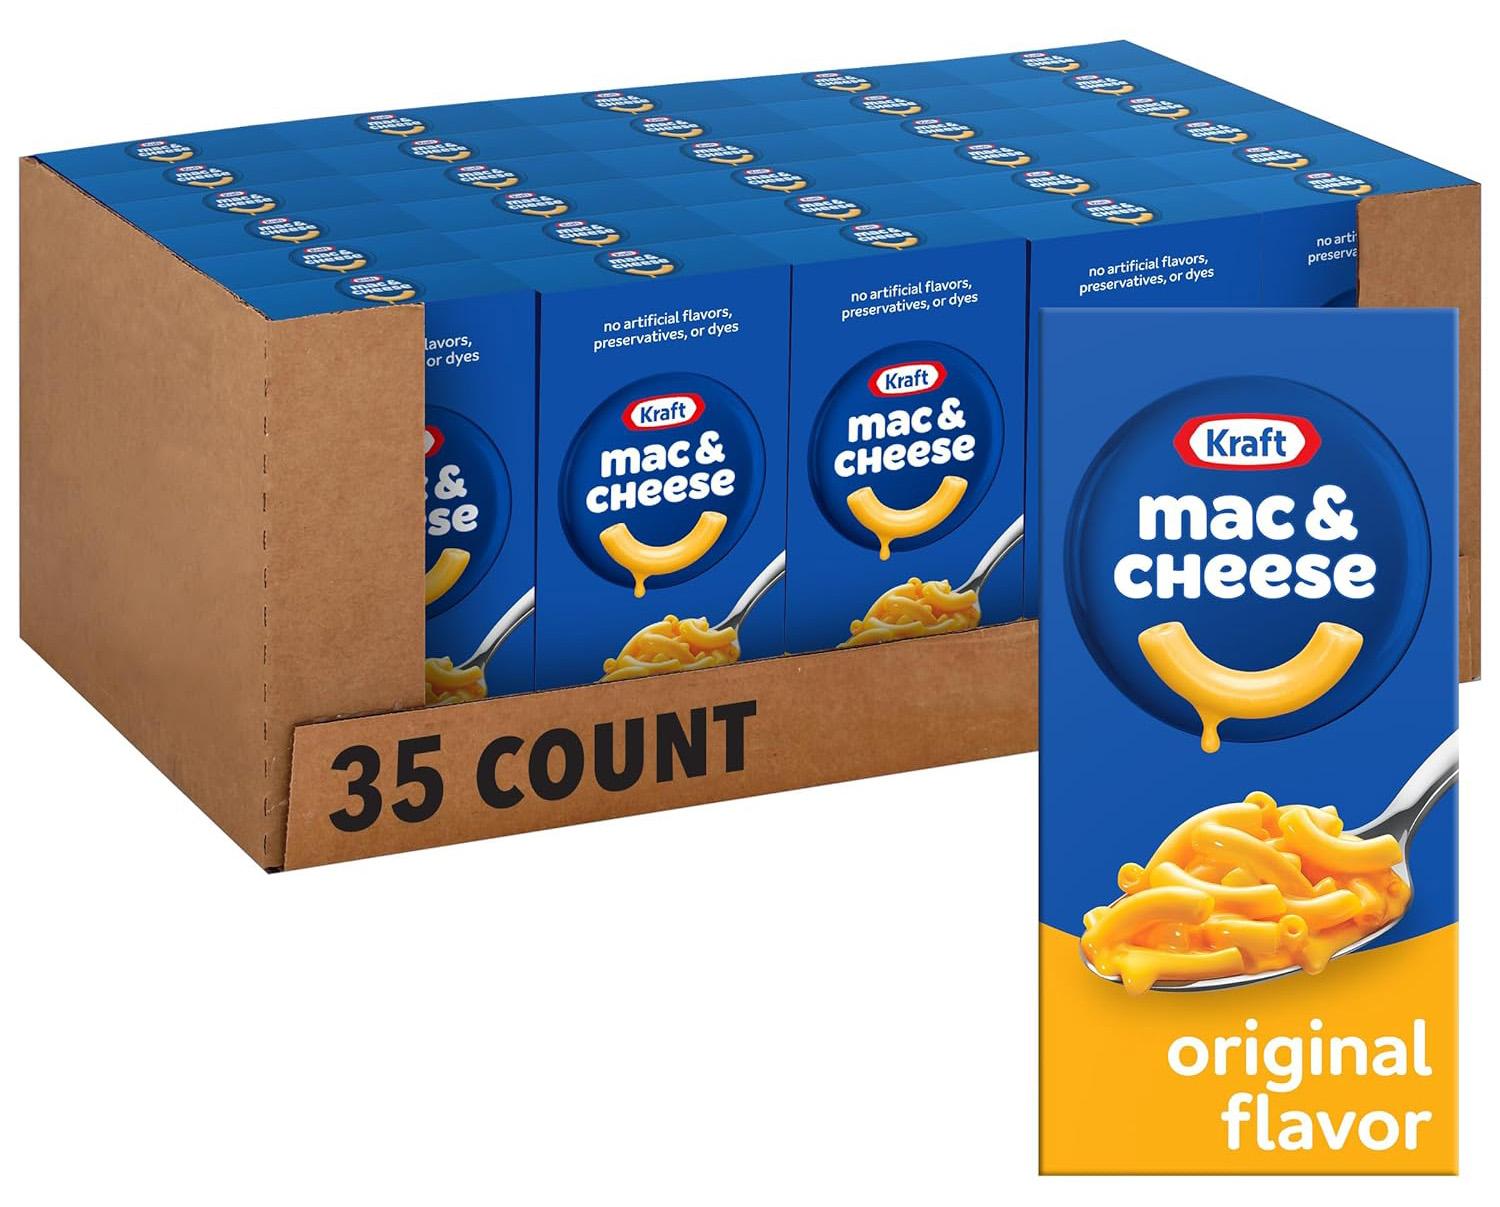 Kraft Original Flavor Macaroni and Cheese Dinner 35 Pack for $24.23